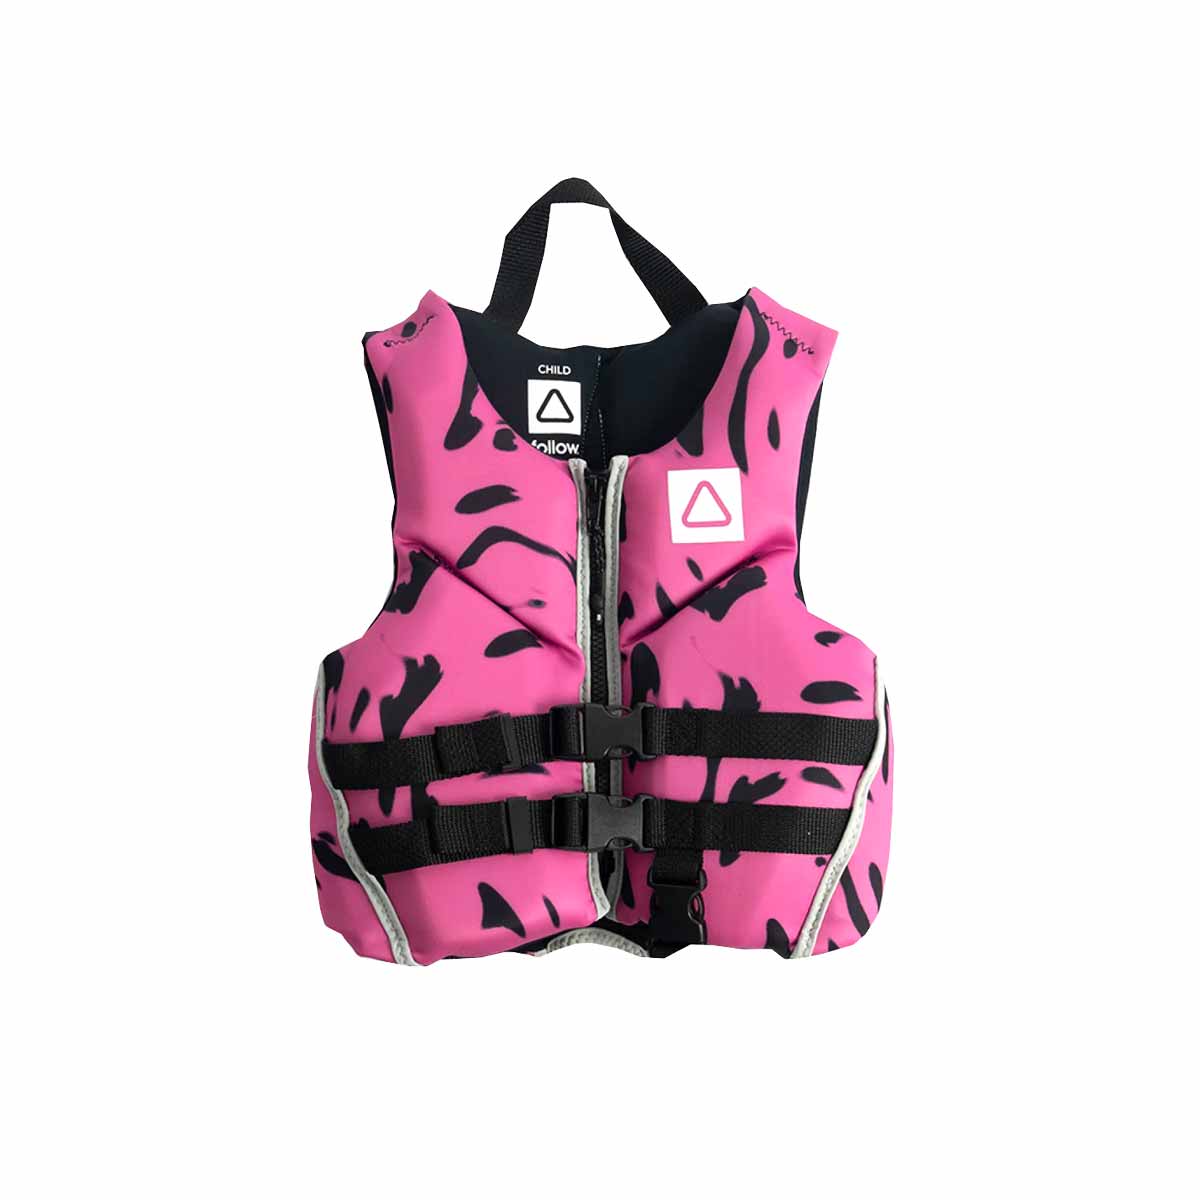 Follow Kids Pop ISO 50N Life Vest – Youth – Pink